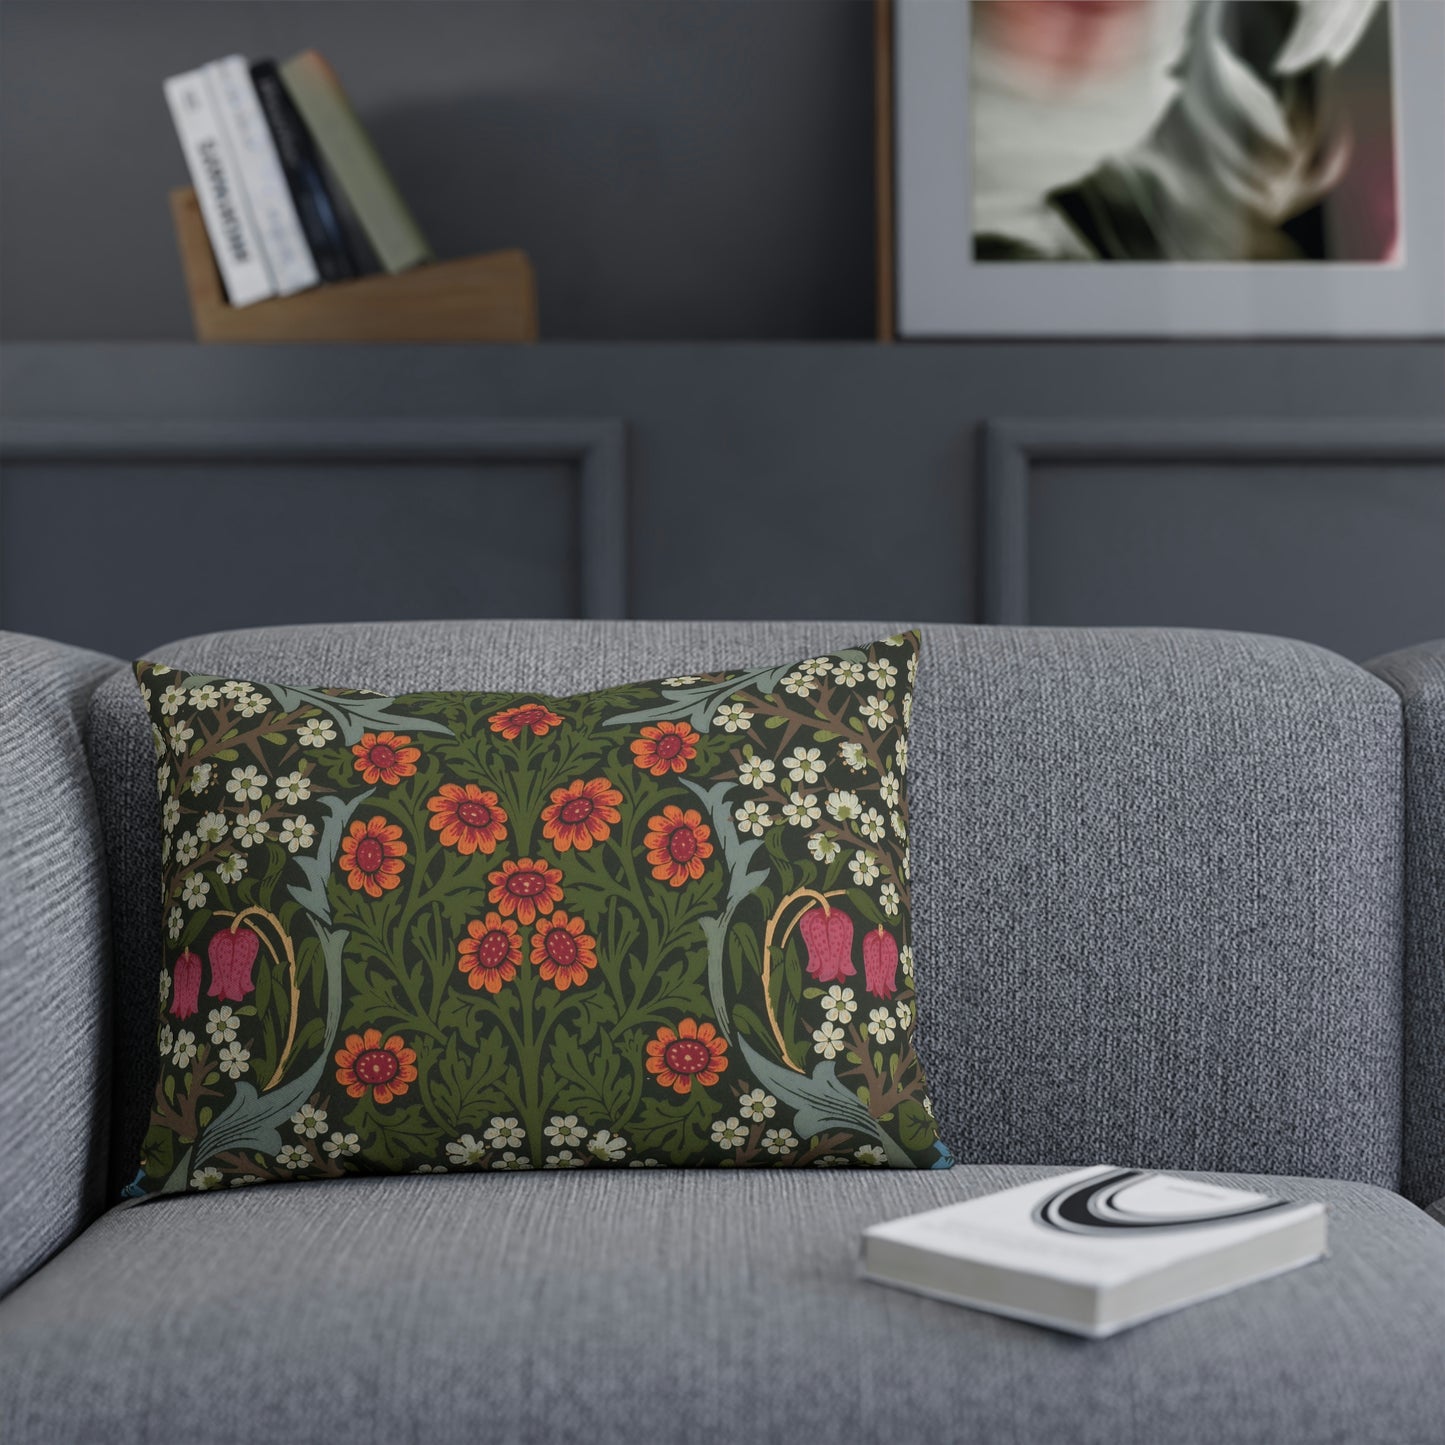 william-morris-cushion-and-cushion-cover-blackthorn-collection-14